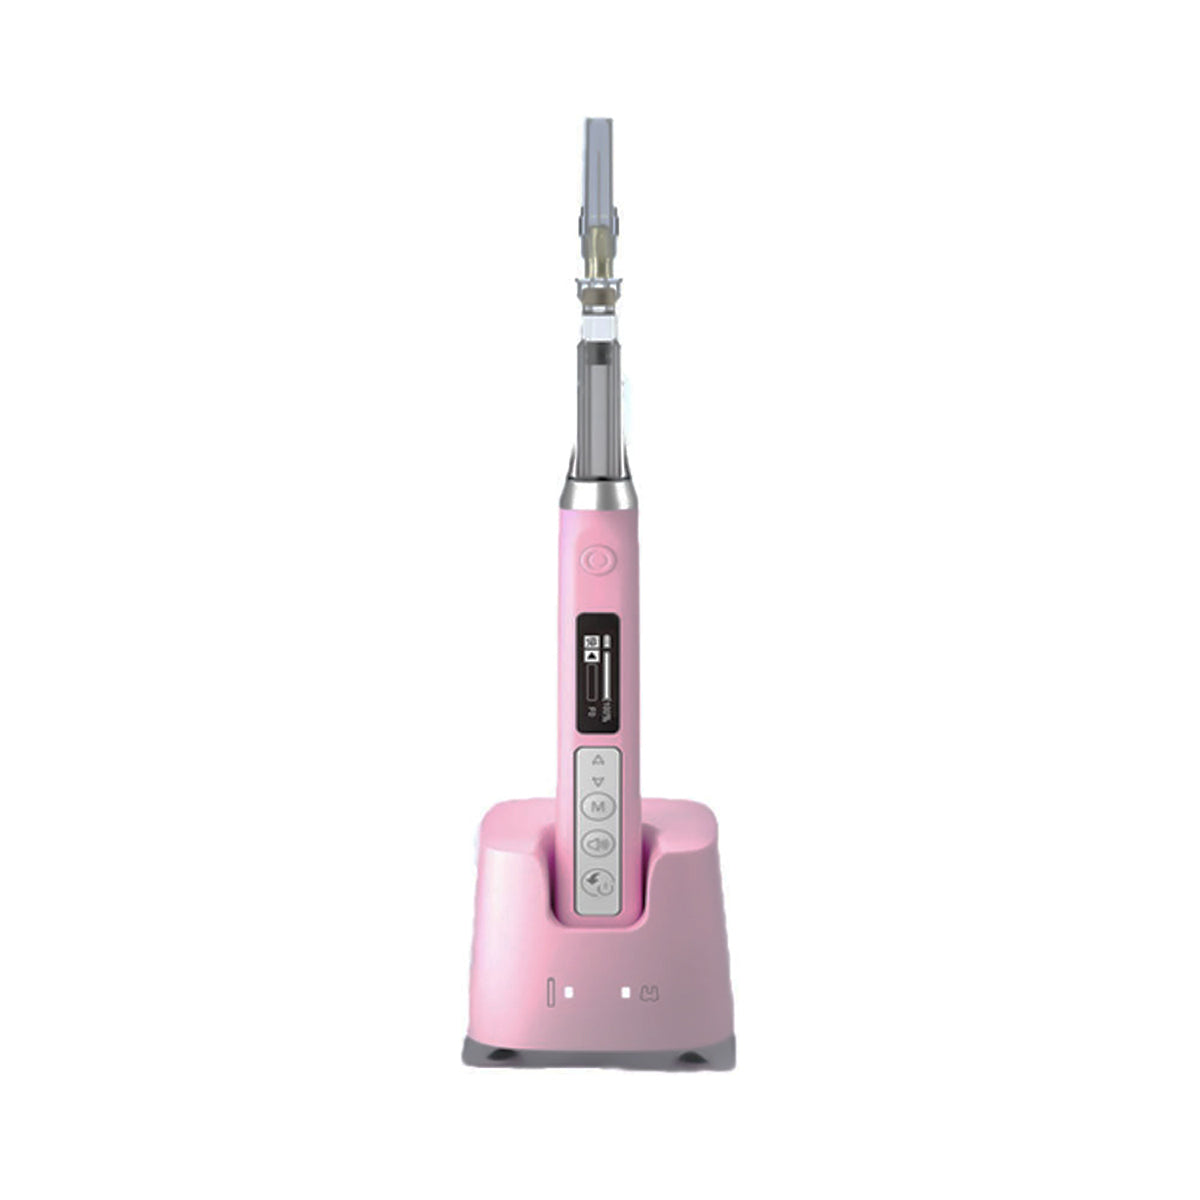 Woodpecker Super Pen Electronic Delivery Syringe System - pairaydental.com